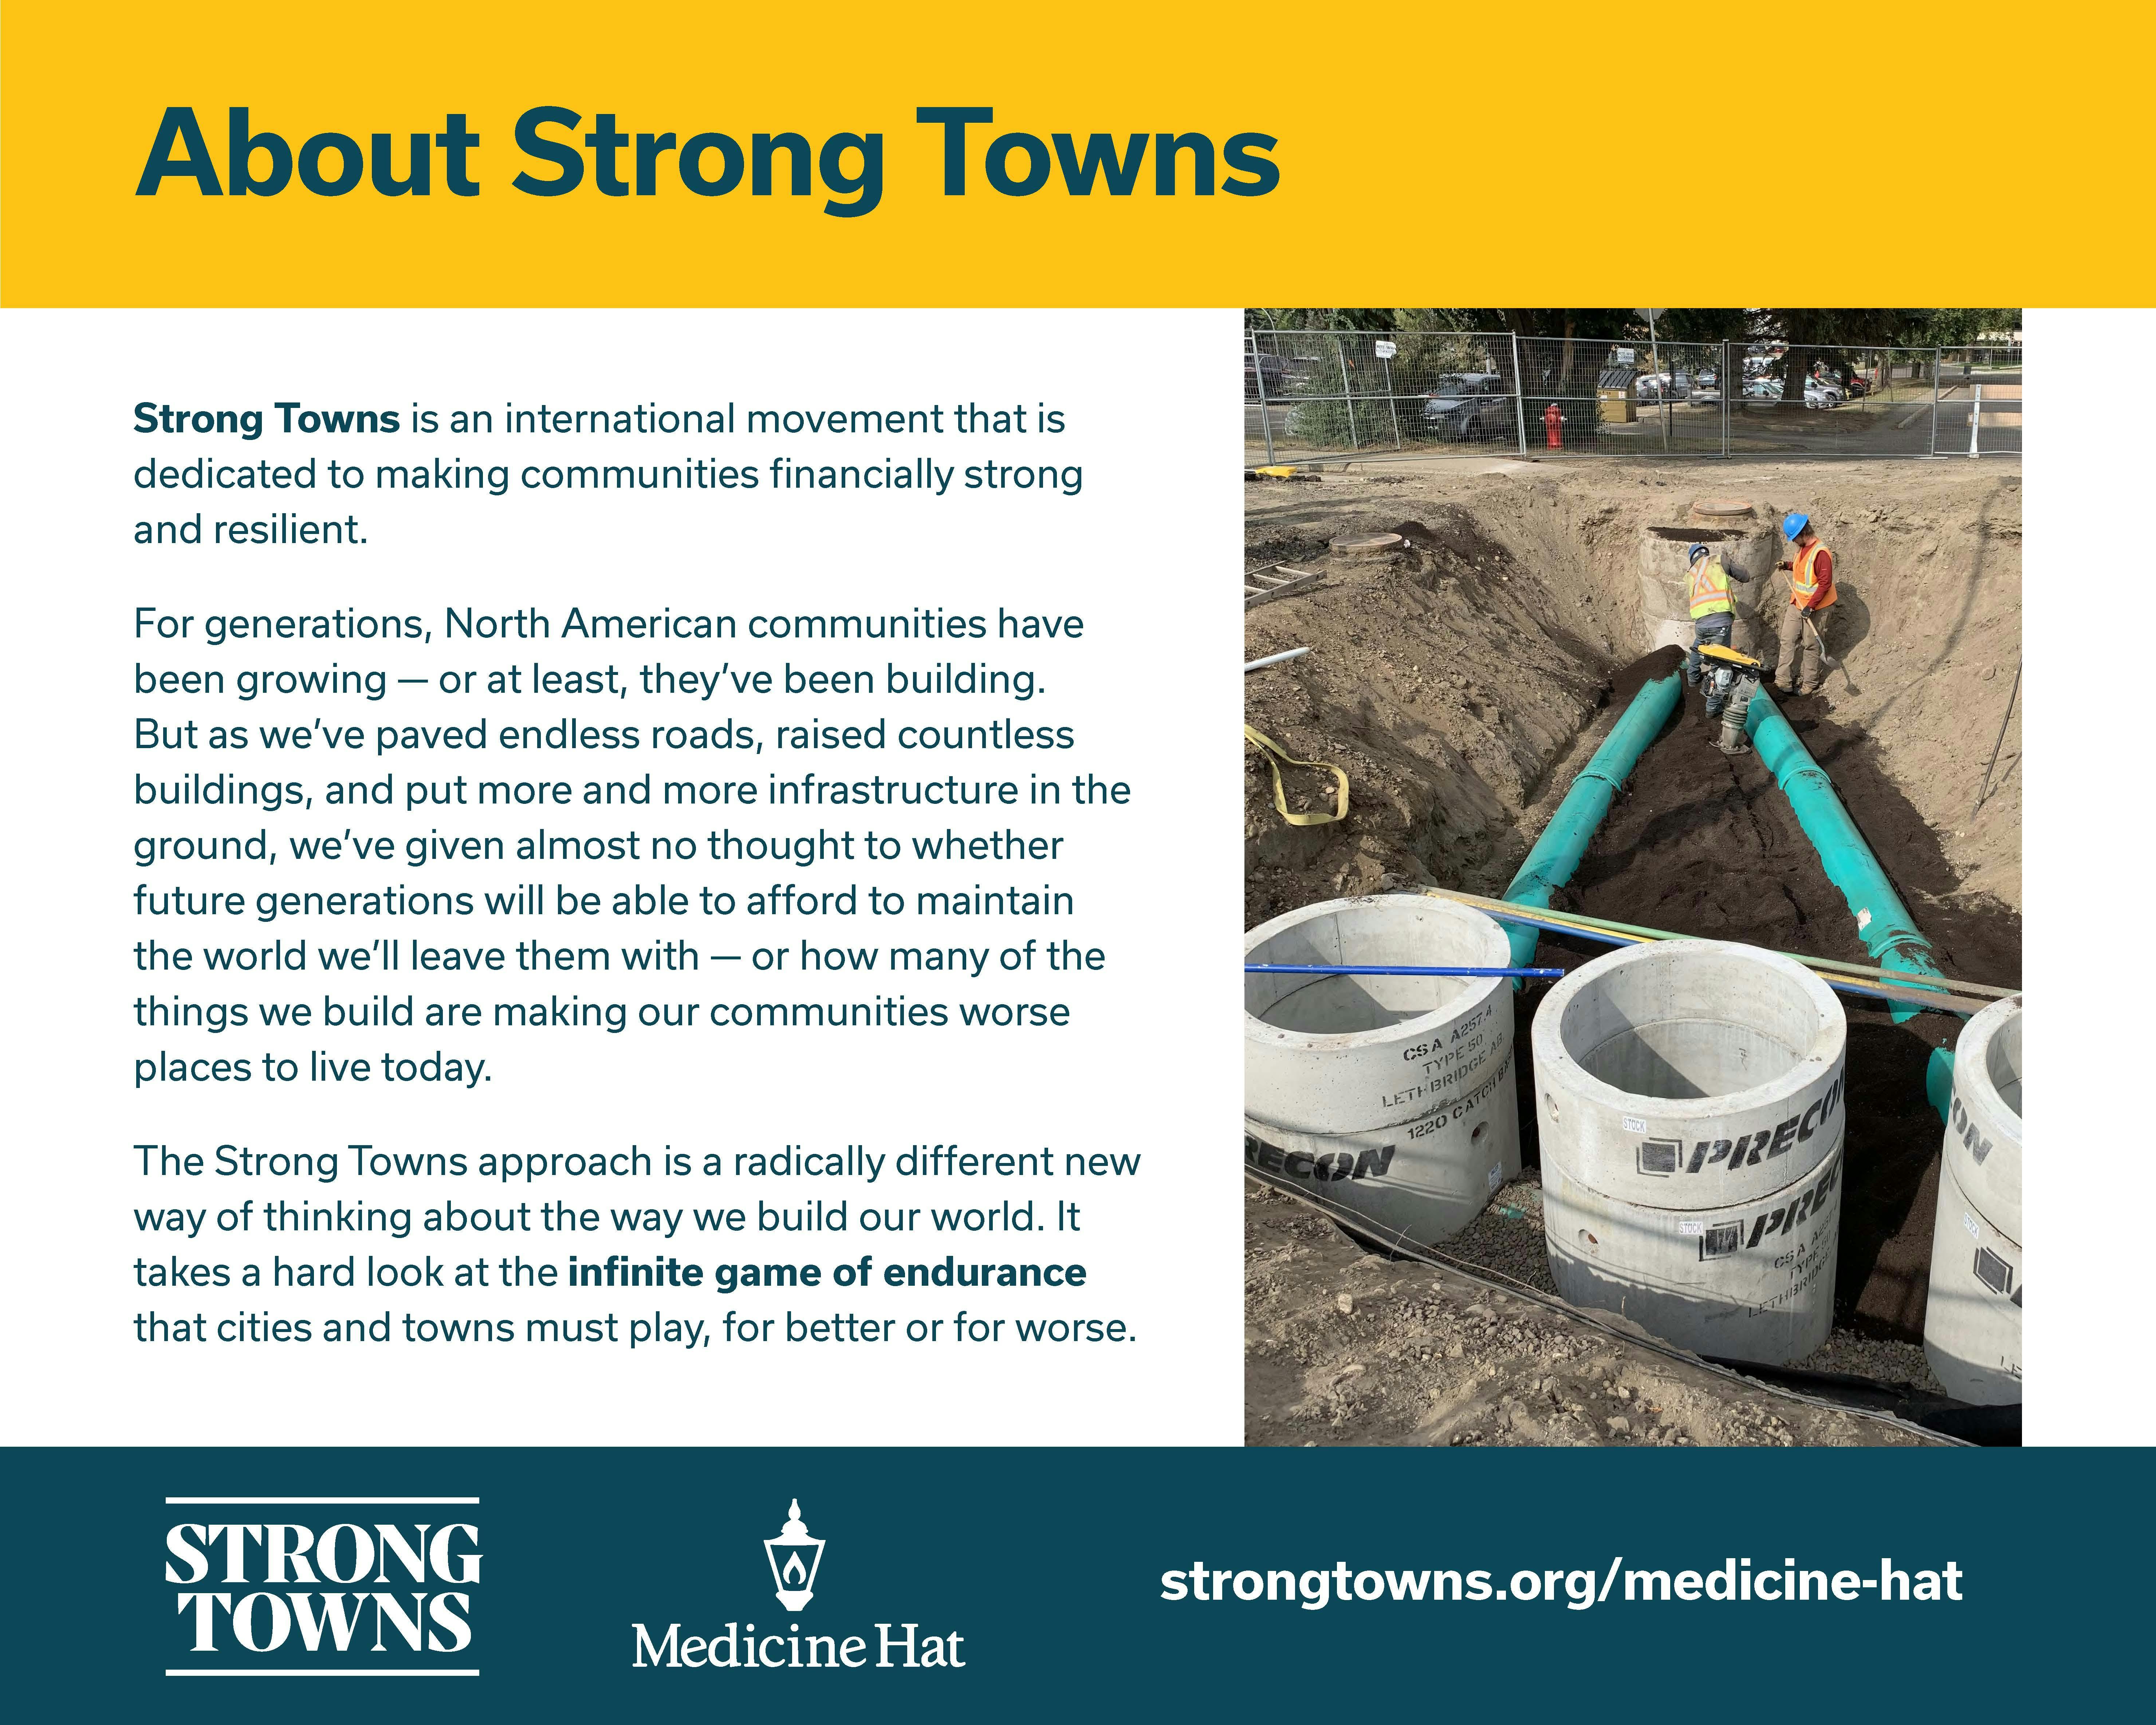 "About Strong Towns" display at trade show